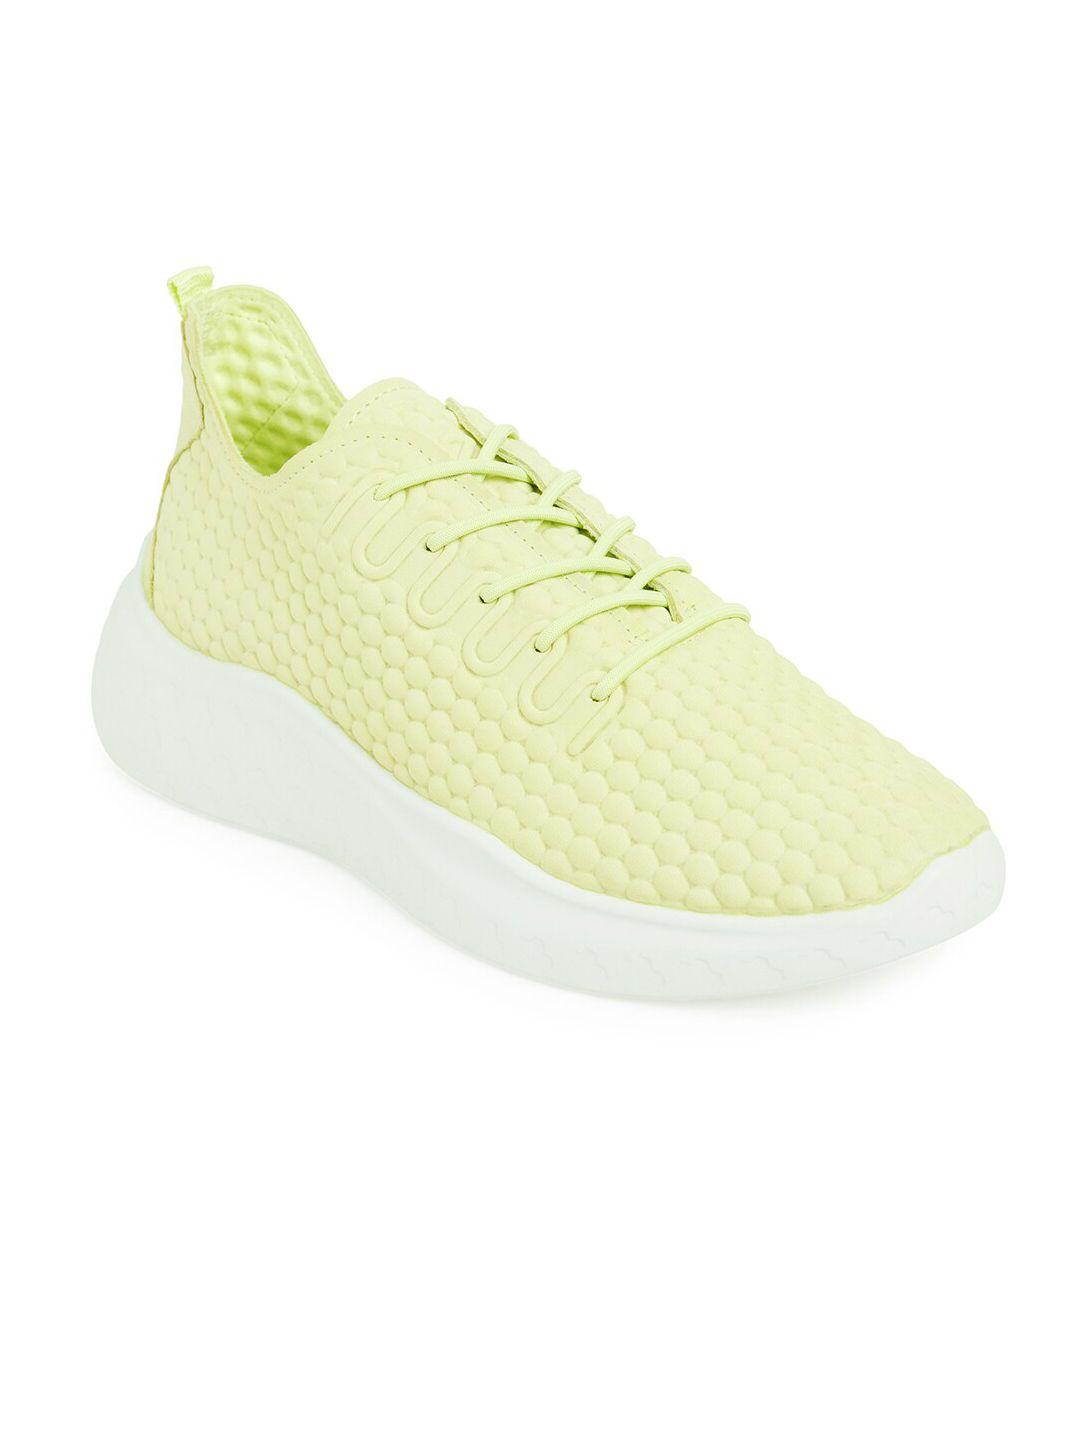 ecco women green athleisure leather walking non-marking shoes